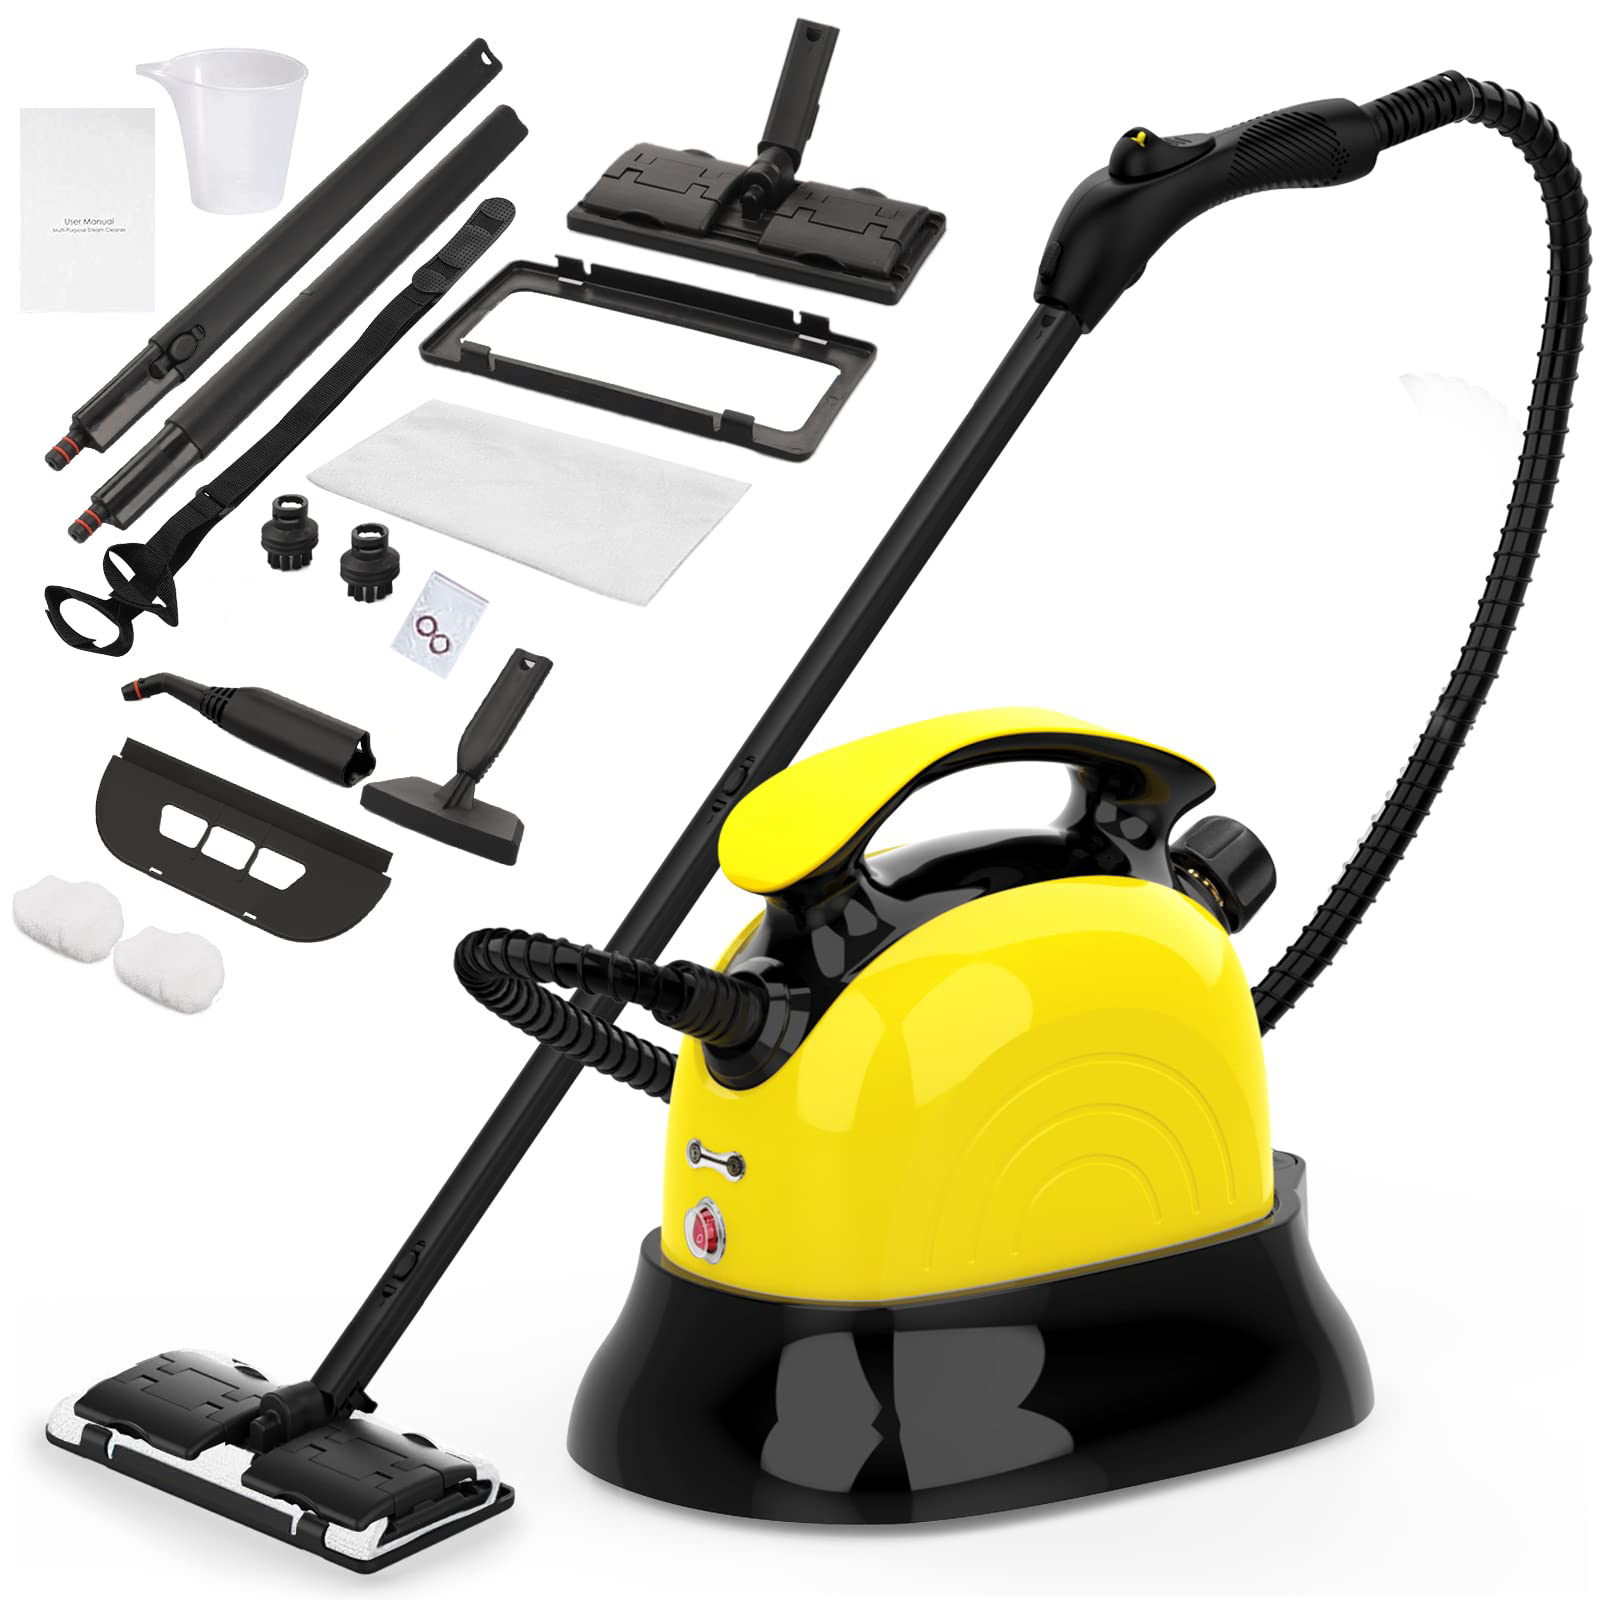 Cheflaud 1500W Multi-Purpose Steam Cleaner with 13 Accessories, Household Steamer for Cleaning, Rolling Cleaning Mop Machine for Carpet, Floors